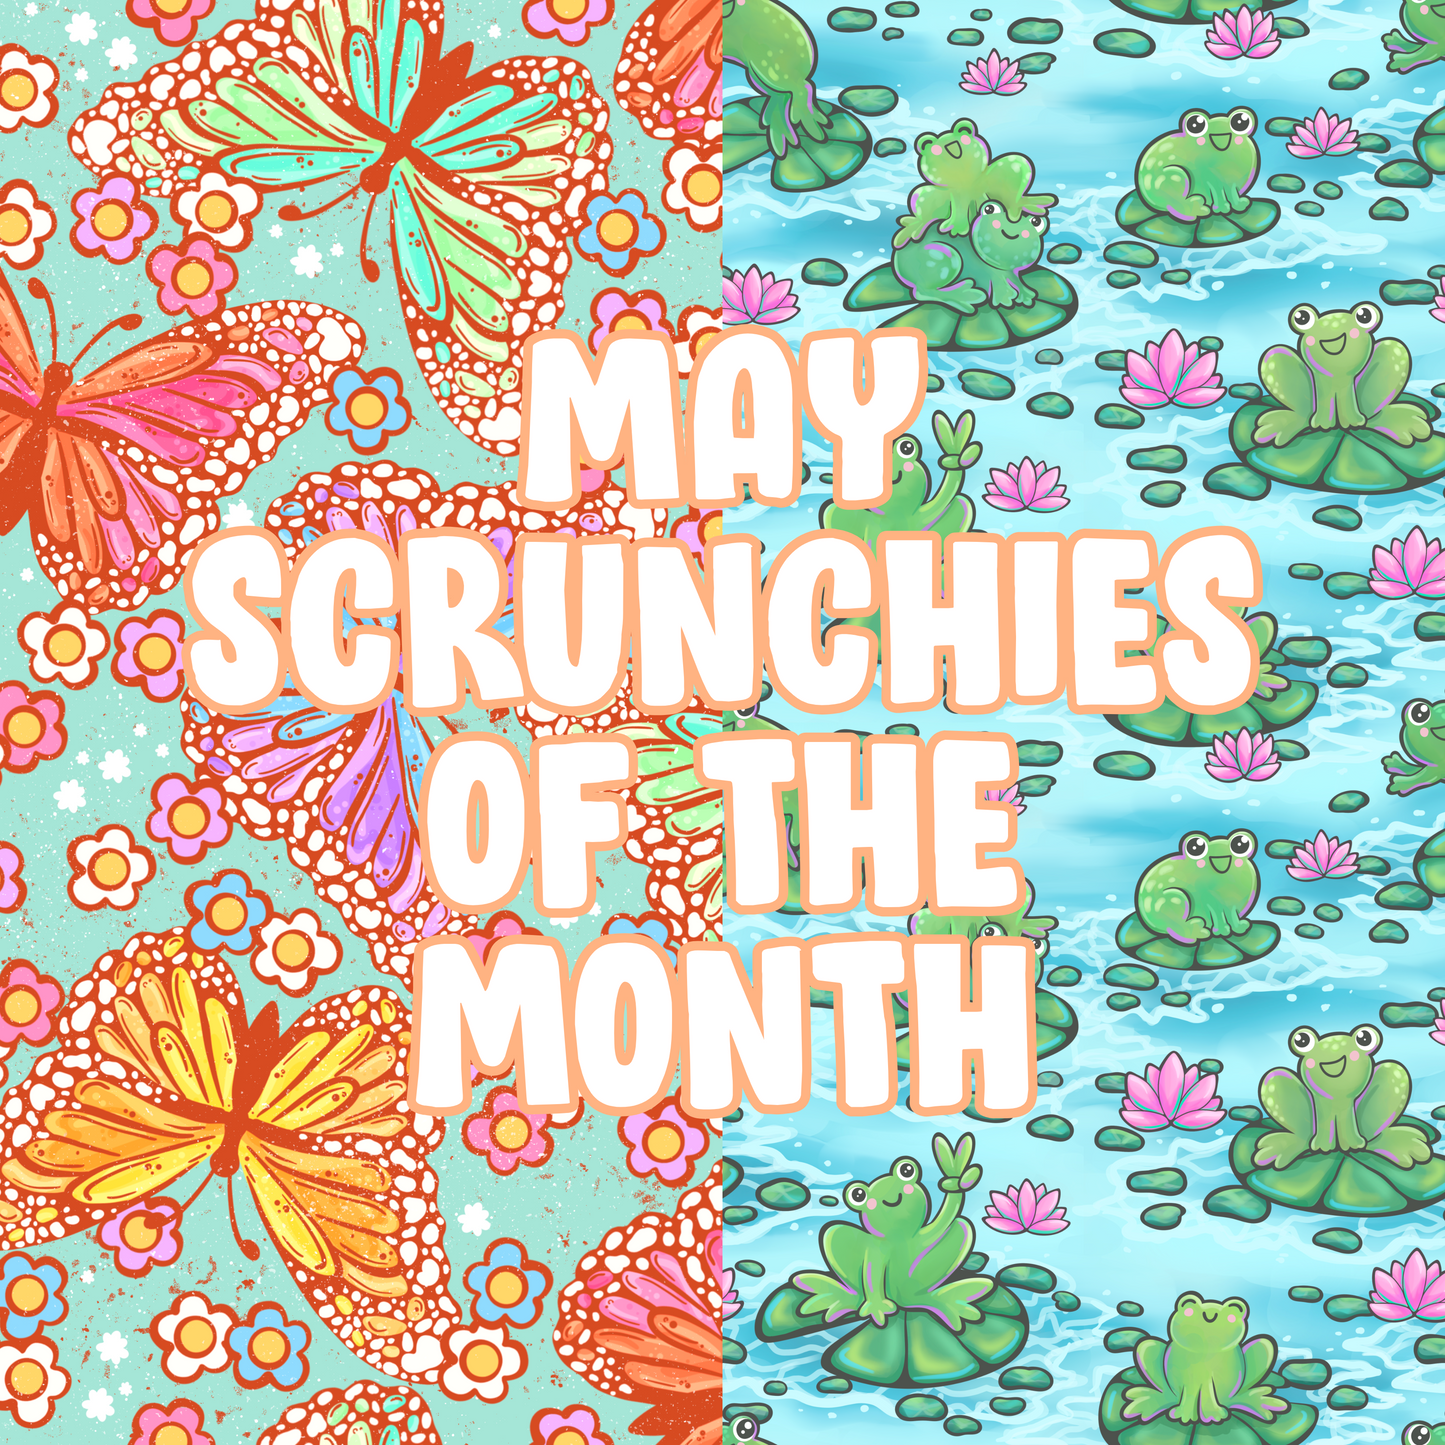 Scrunchies of the Month